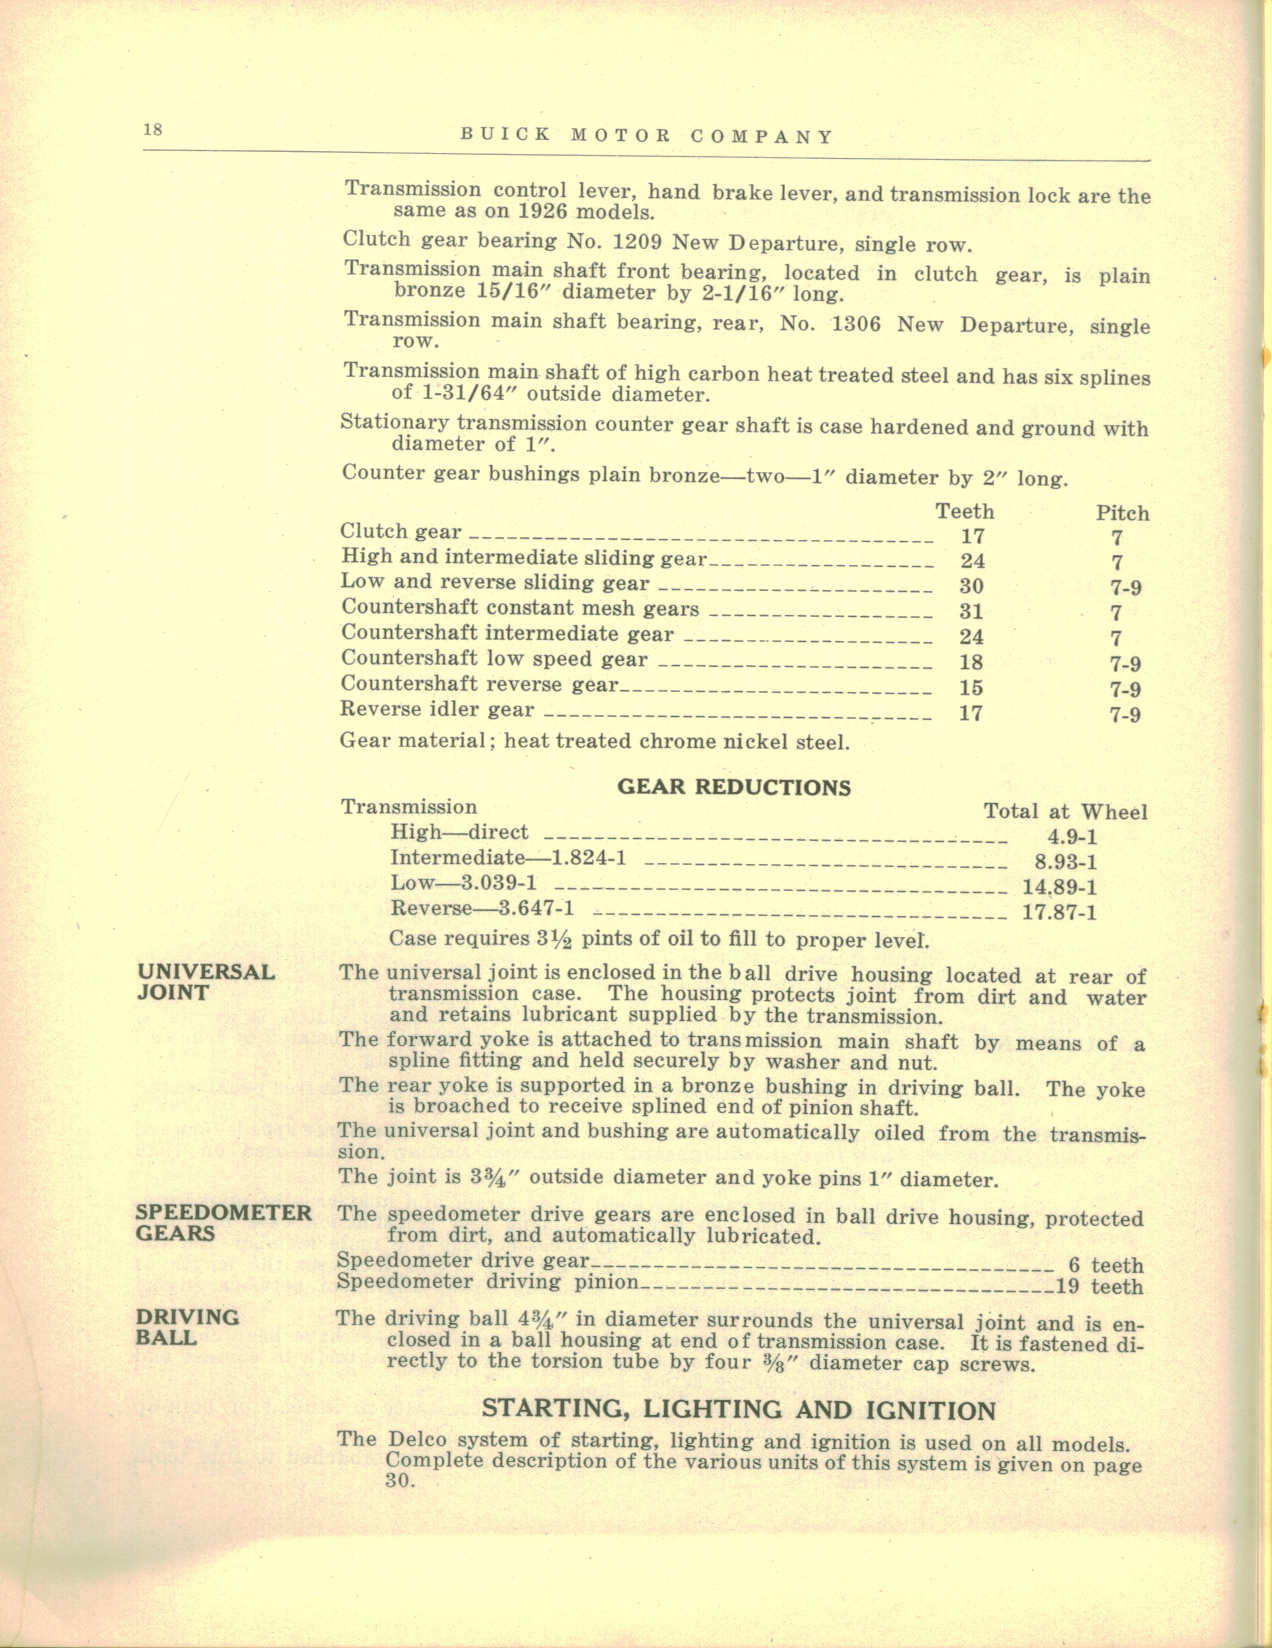 1927 Buick Special Features and Specs-18